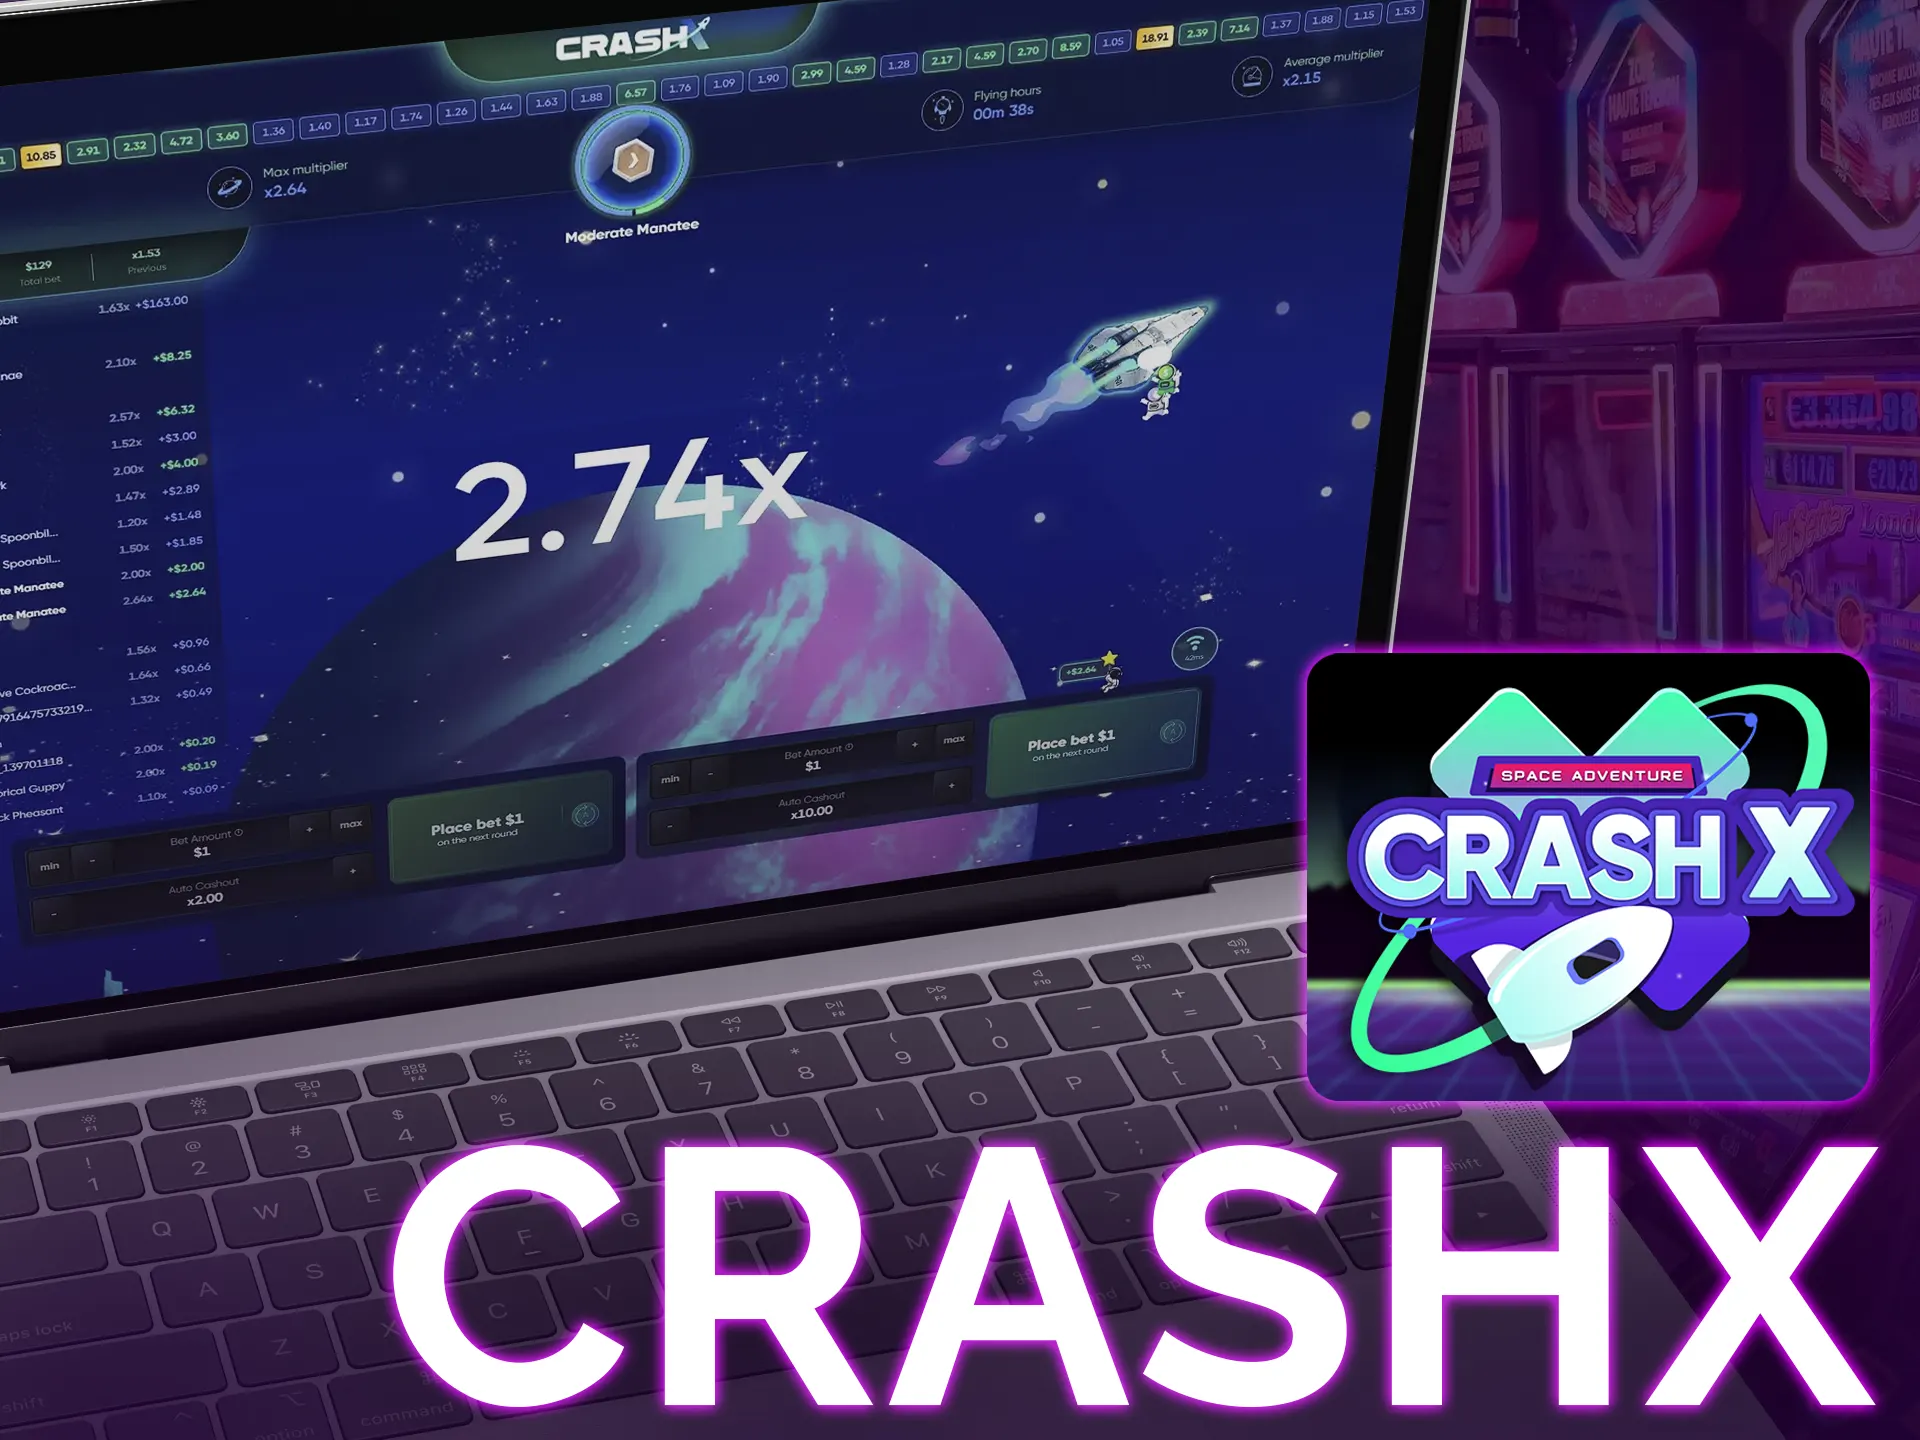 Experience thrills with Crash X, offering versatile betting options.